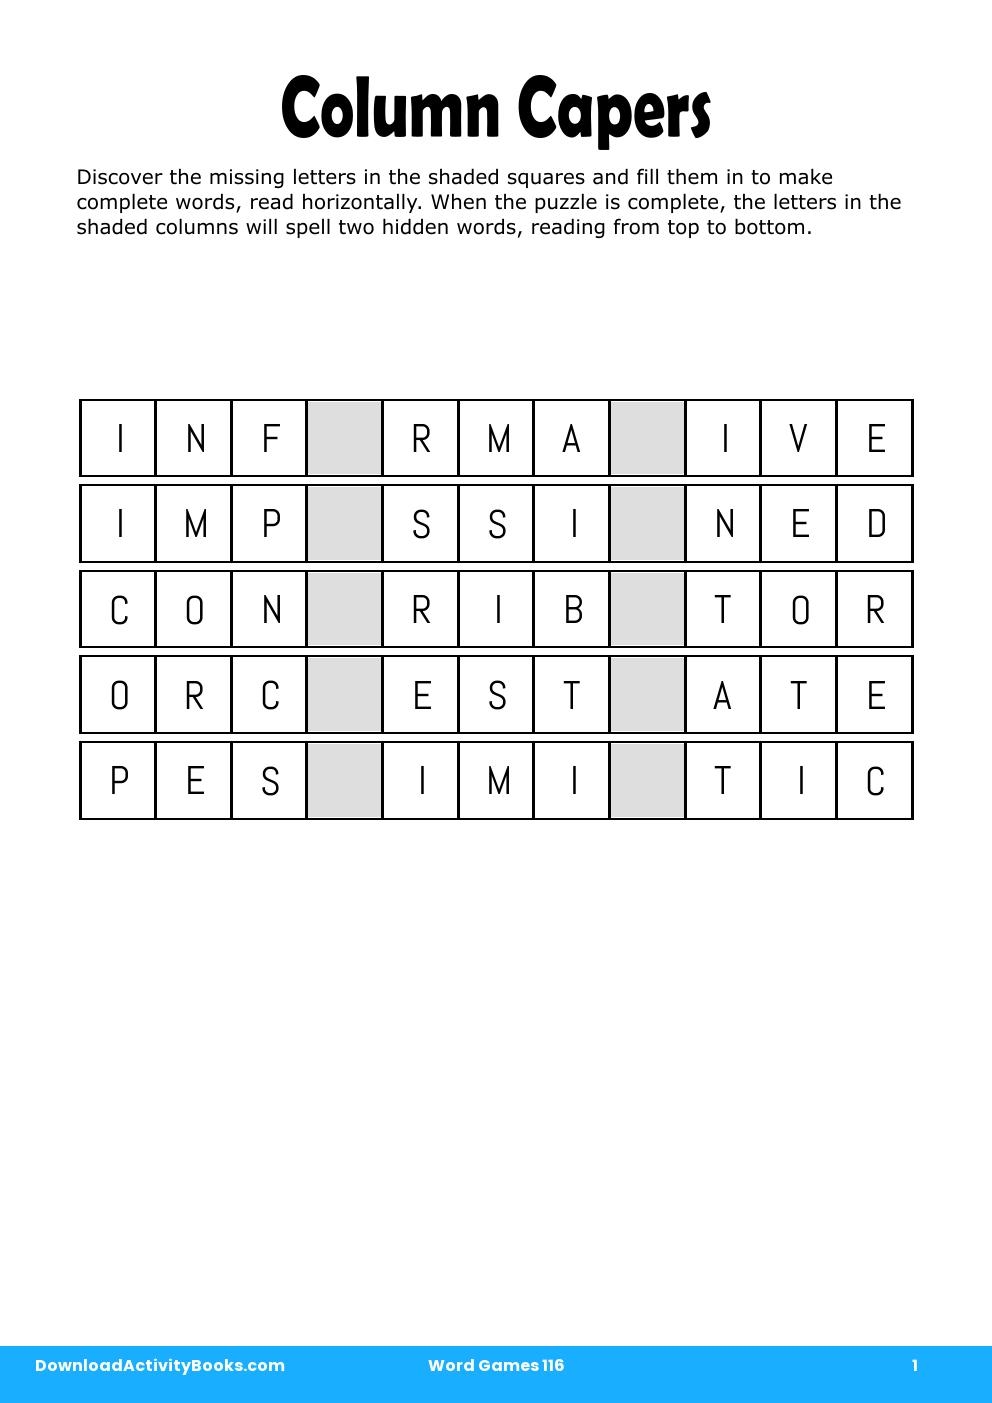 Column Capers in Word Games 116